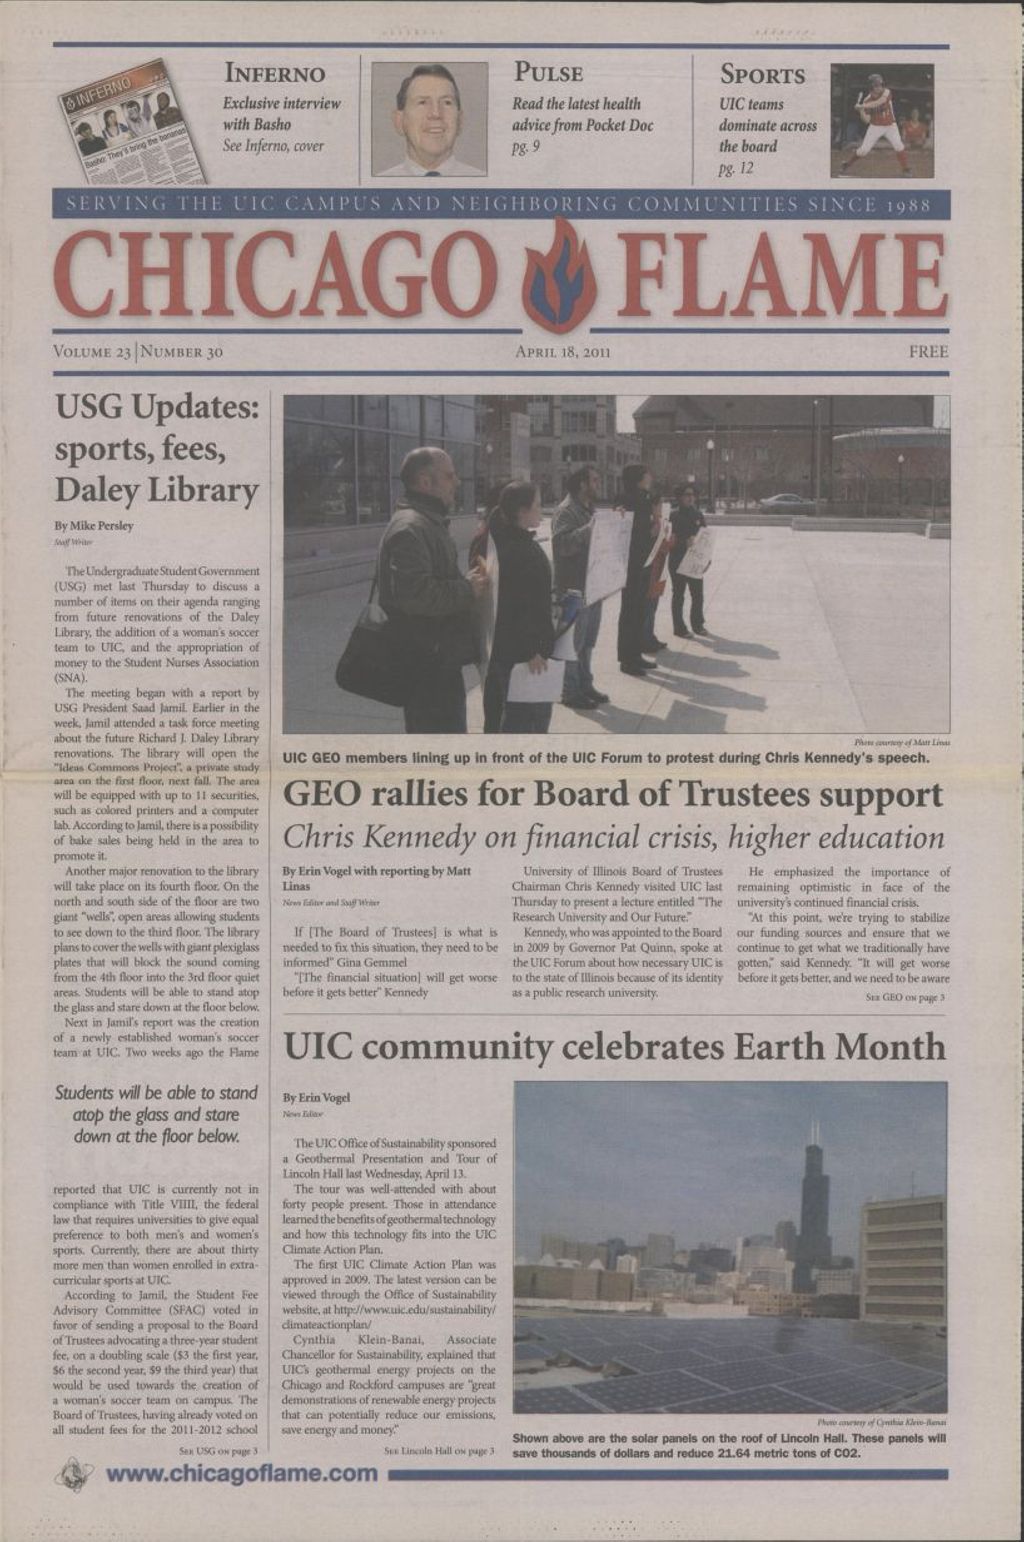 Miniature of Chicago Flame (April 18, 2011)